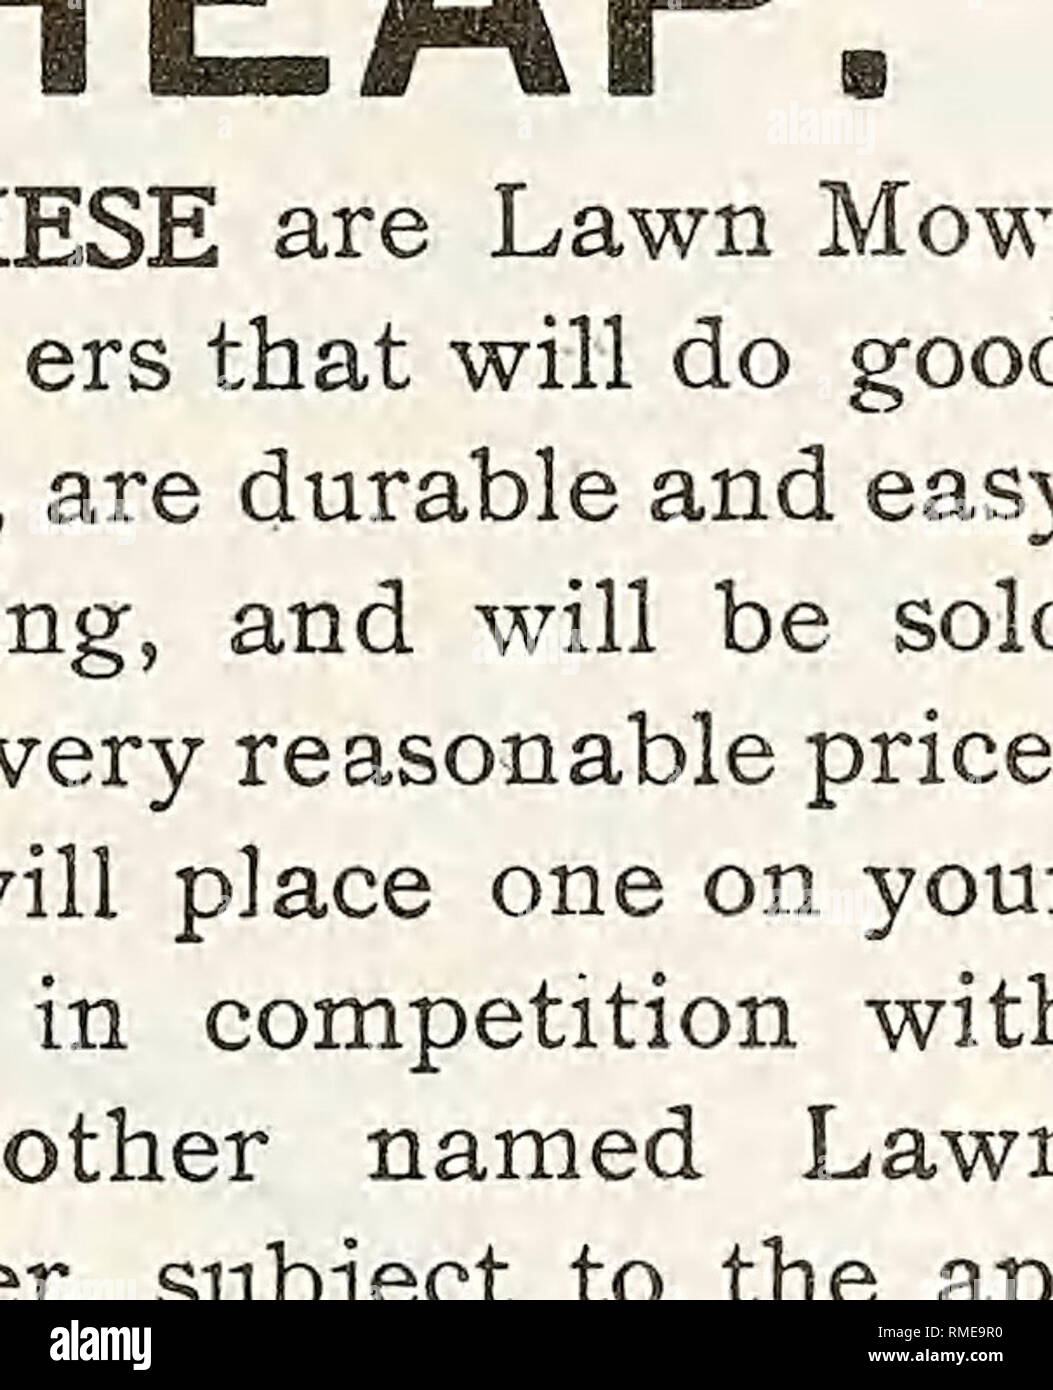 . Annual catalogue. Nurseries (Horticulture); Nursery stock; Vegetables; Seeds; Flowers; Gardening; Equipment and supplies; Agricultural implements; Ebeling, F. H. (Firm). Wet Soil and Grass Clippings will not stick to Steel as they stick to Cast Iron. Lawn Seed, Pure Ground Bone, Sheep Fertilizer. Sheep Dressing for Plants and La'wn Dressing, Qaick^ Last- ing and Economical, L-awo Fertilizers ]price:^i^ist. Sheep Fertilizer, 100 lbs, .$3.00 Sheep Fertilizer, 50 lbs.. 1.75 Ground Bone 100lbs.. 2.00 Phosphate 100 lbs.. 2.00 Nitrate of Soda, per lb 10 Nitrate of Soda., .100 lbs.. 6.00 Nitrate of Stock Photo